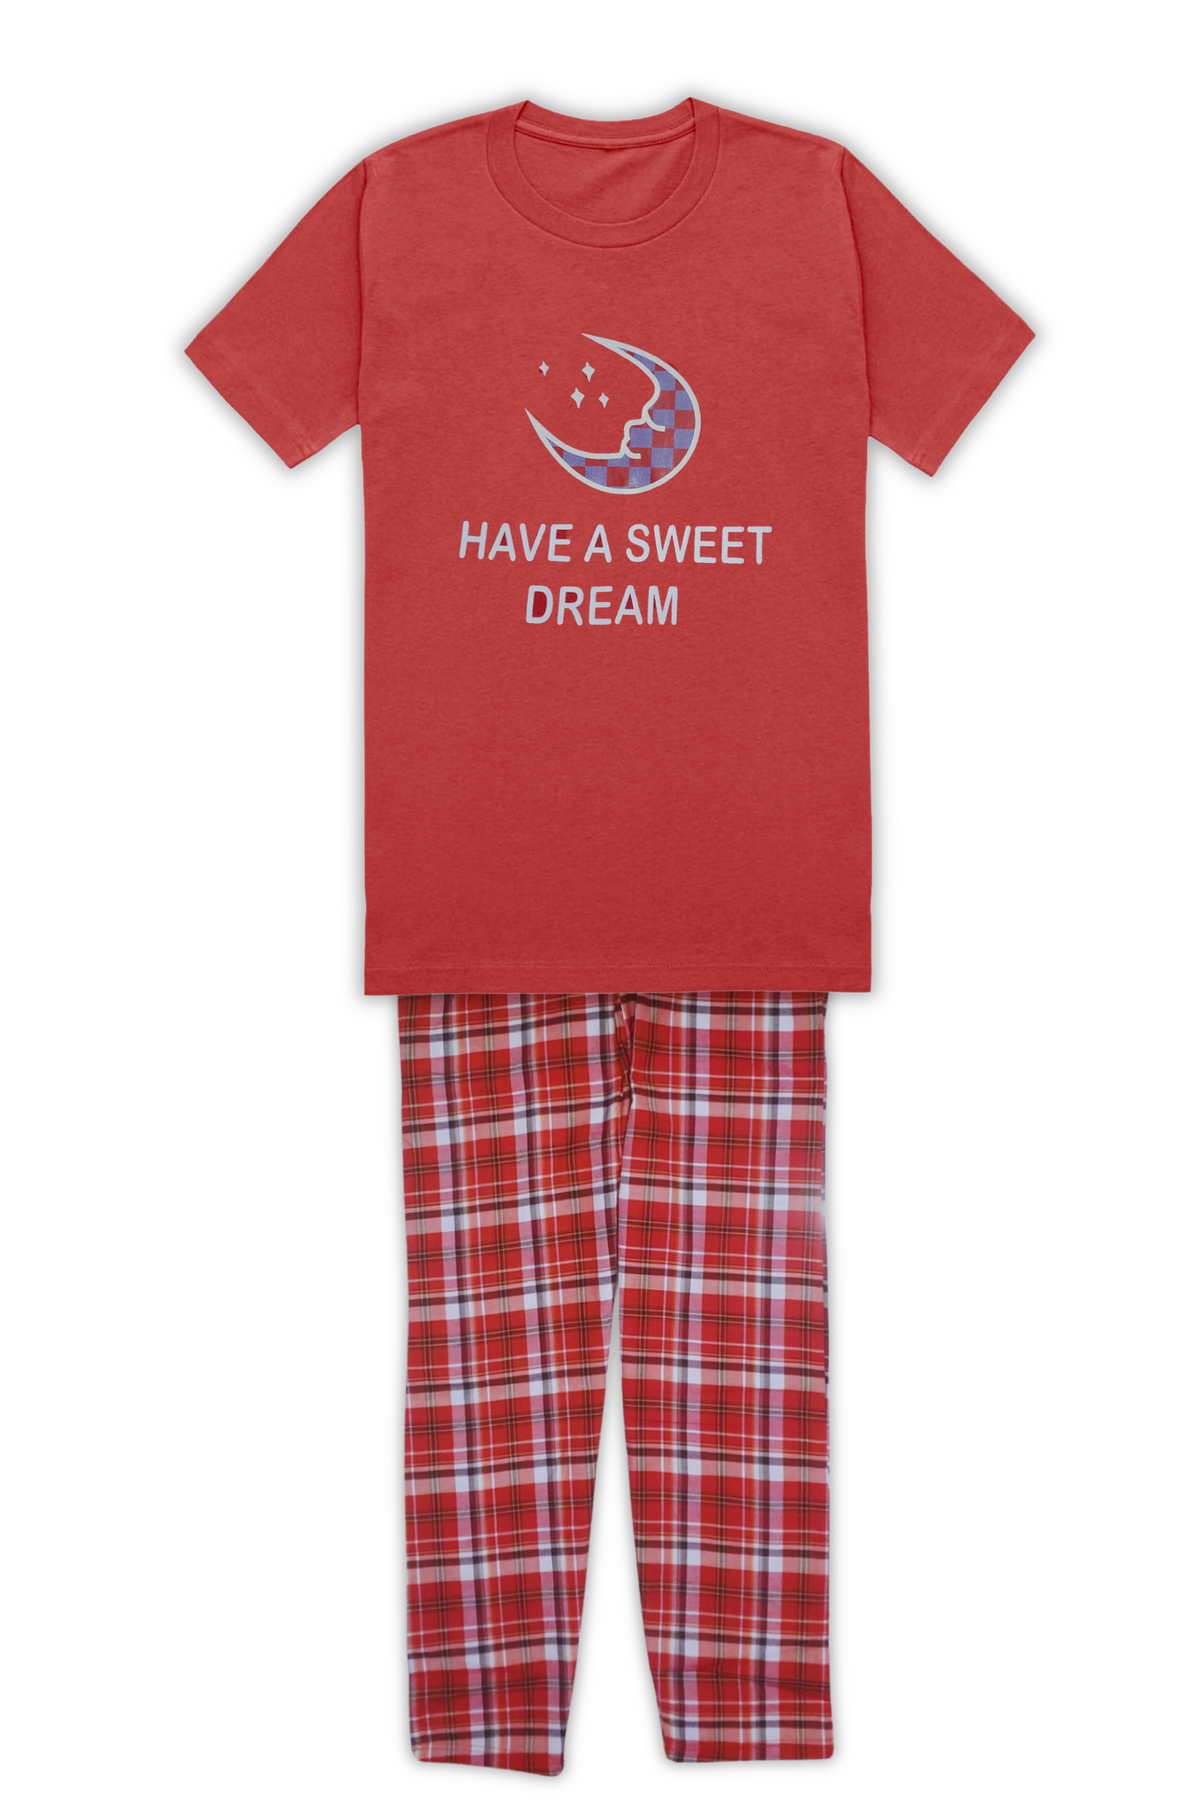 Women's Night Suit Short Sleeve Have A Sweet Dream (Red)